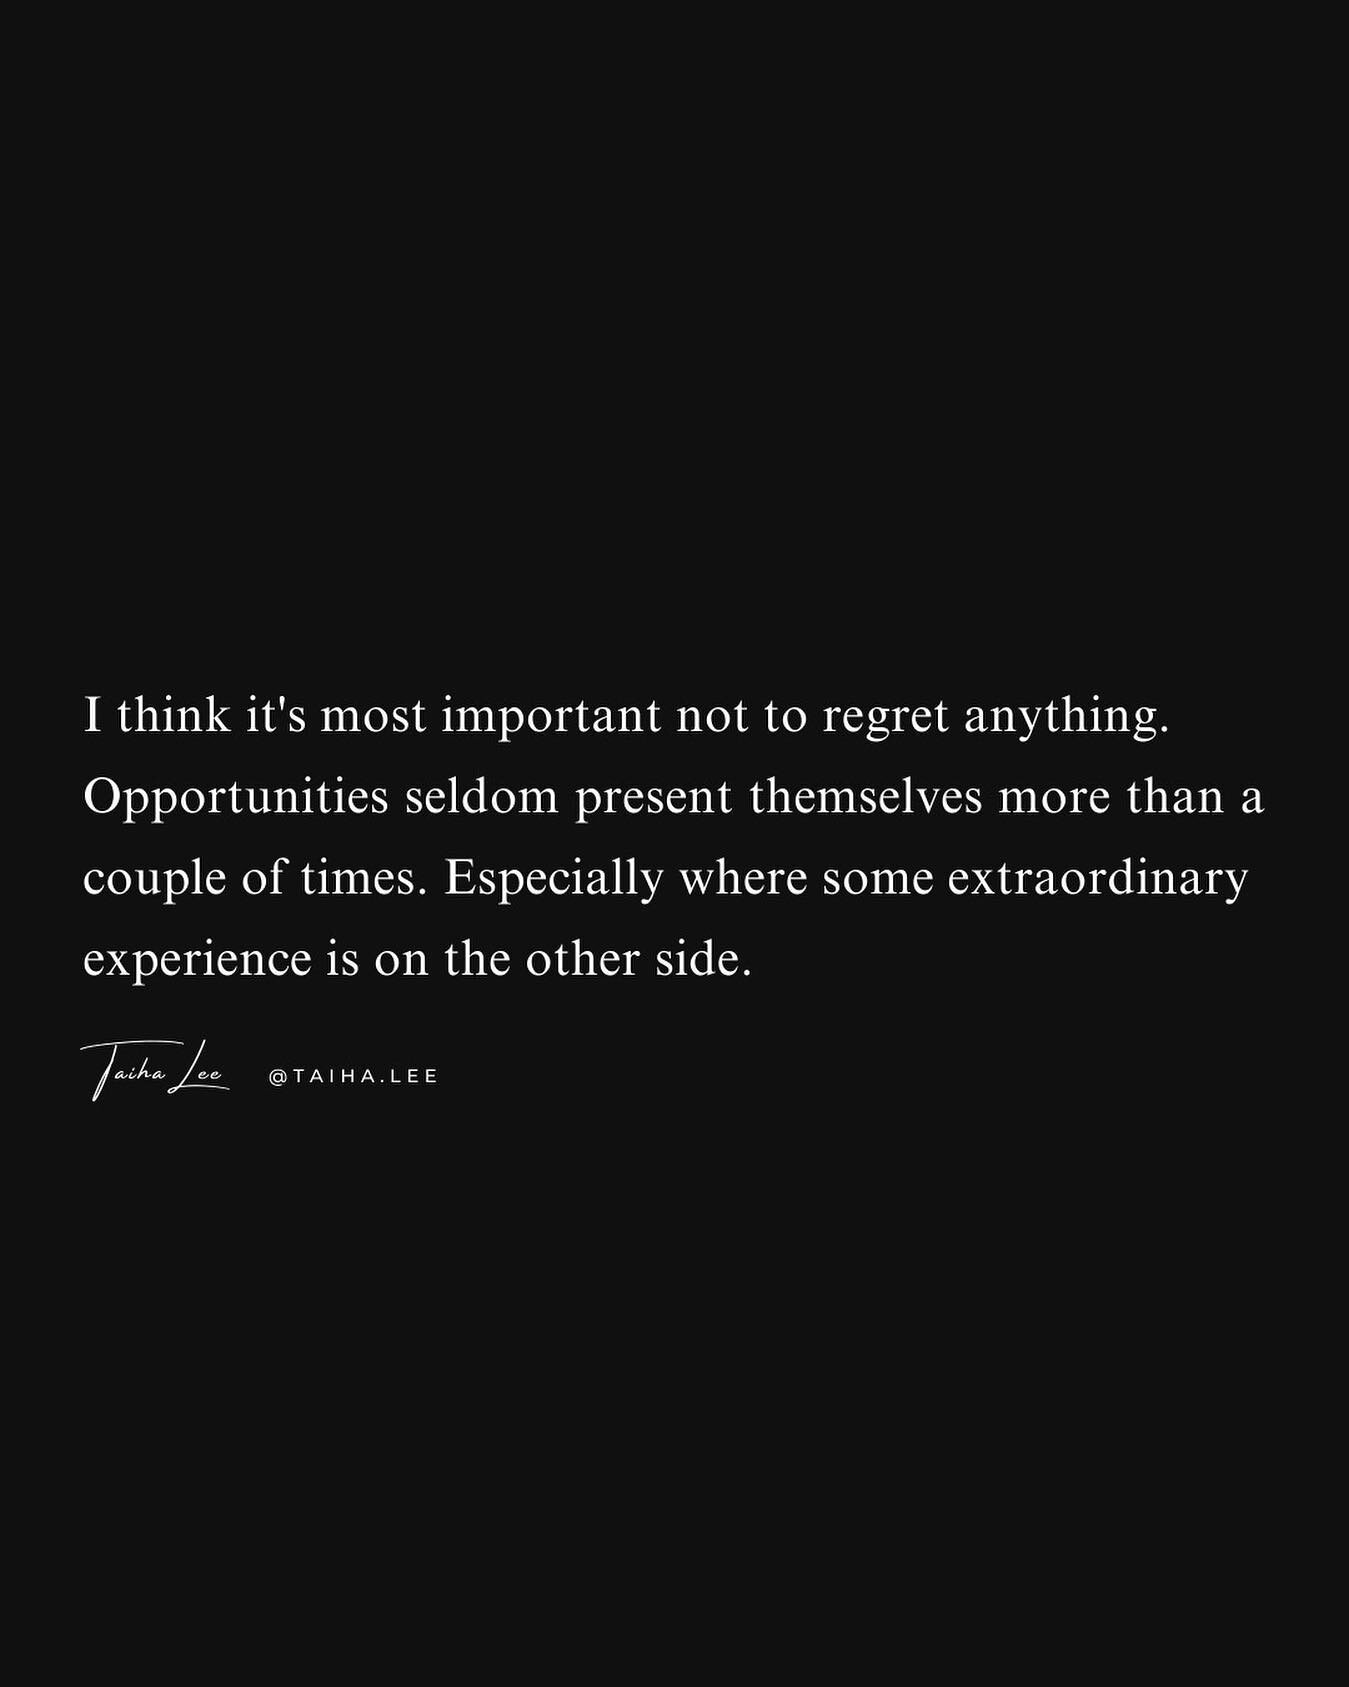 I think it's most important not to regret anything. Opportunities seldom present themselves more than a couple of times. Especially where some extraordinary experience is on the other side. 
⠀⠀⠀⠀⠀⠀⠀⠀⠀
Taken from one of my personal journal entries fro